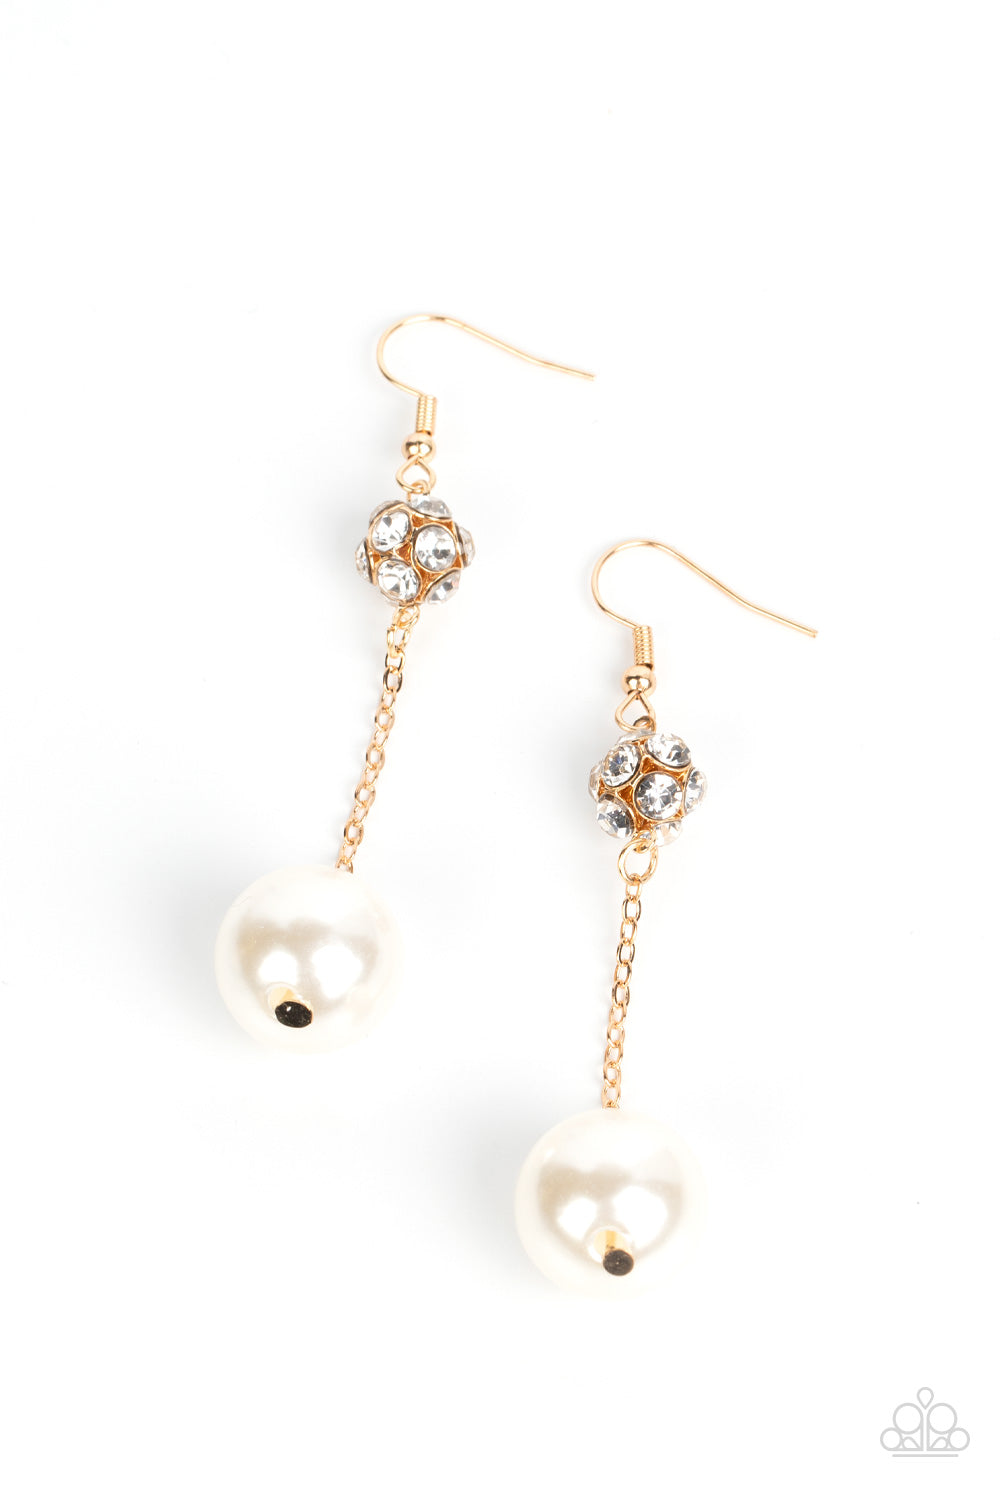 oversized white pearl swings from the bottom of a dainty gold chain that is suspended from a white rhinestone encrusted gold bead